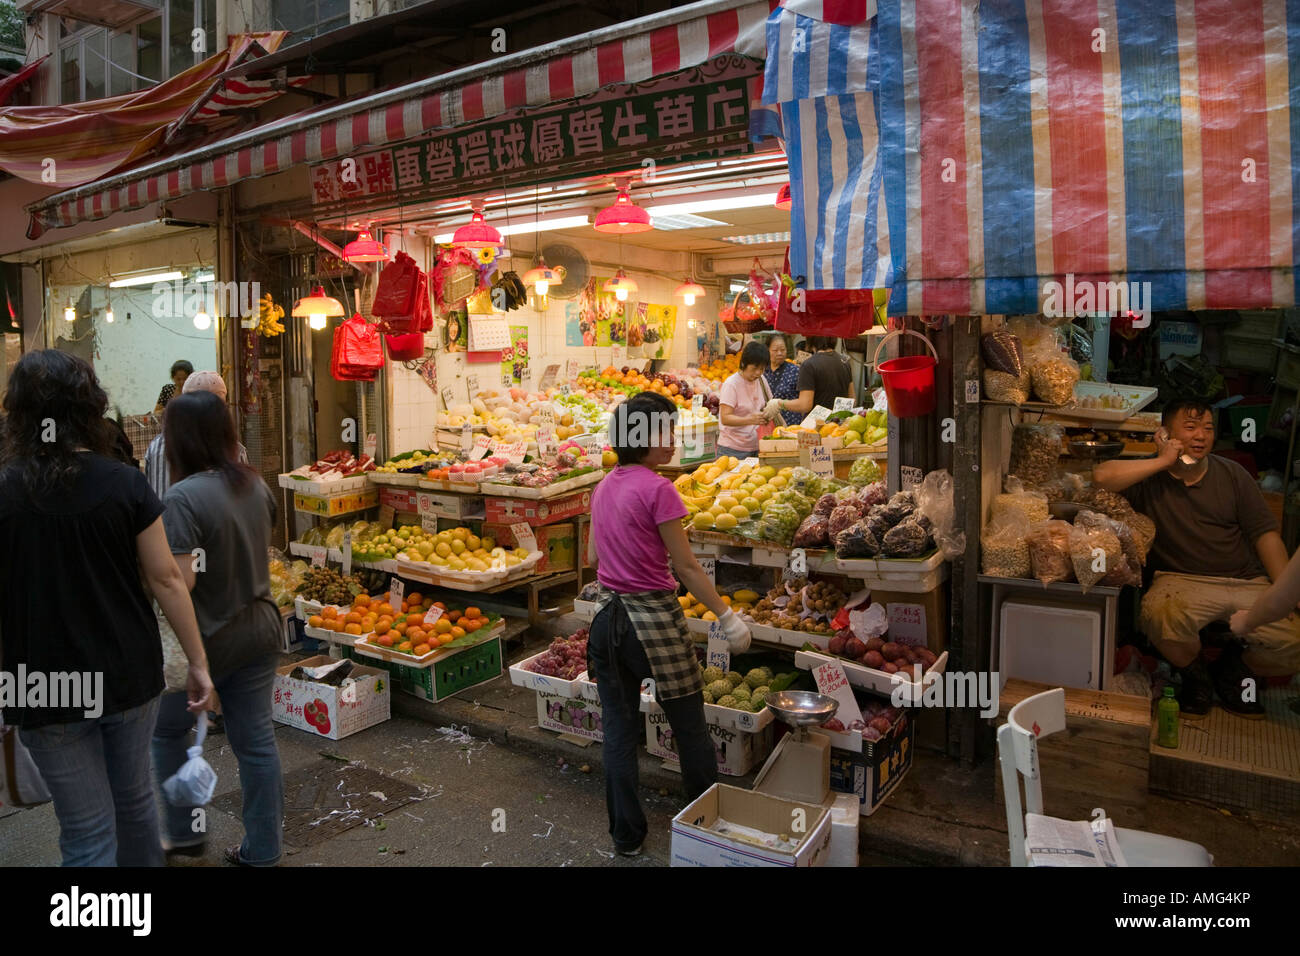 A woman adjusts the display of fresh fruit and vegetables in a shop in Wan Chai market Hong Kong Stock Photo